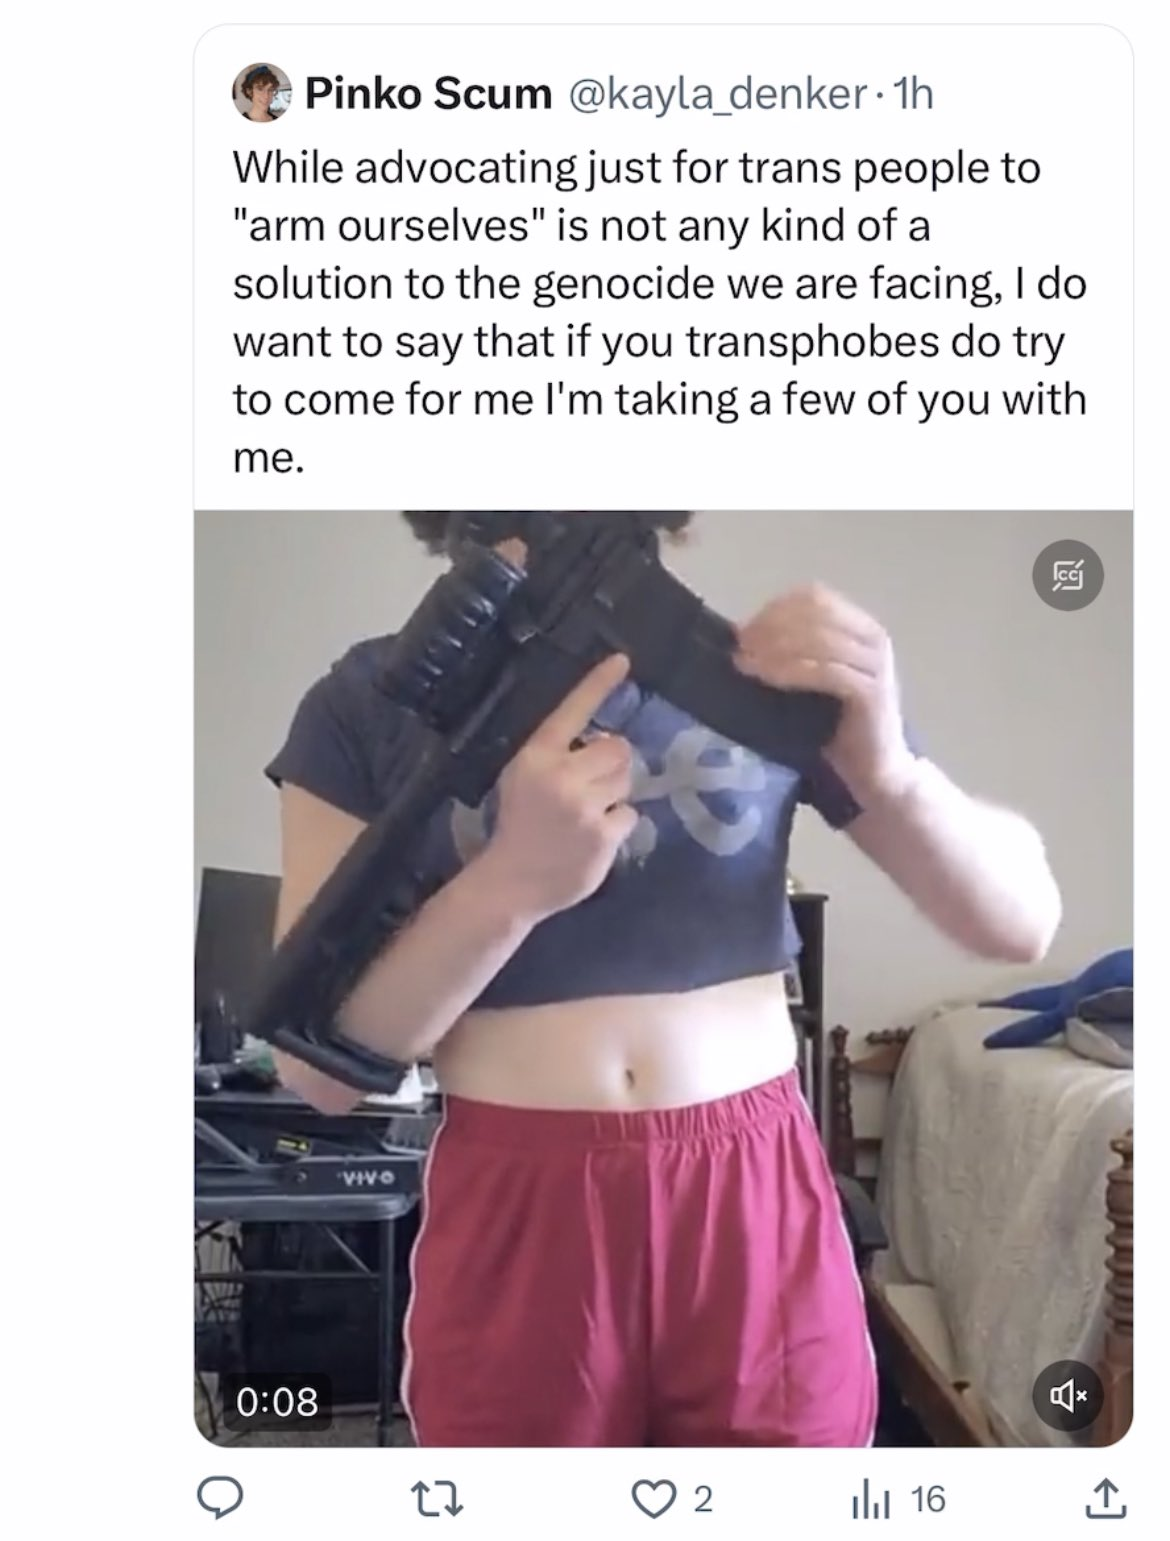 While advocating just for trans people to "arm ourselves" is not any kind of a solution to the genocide we are facing, I do want to say that if you transphobes do try to come for me I'm taking a few of you with me.